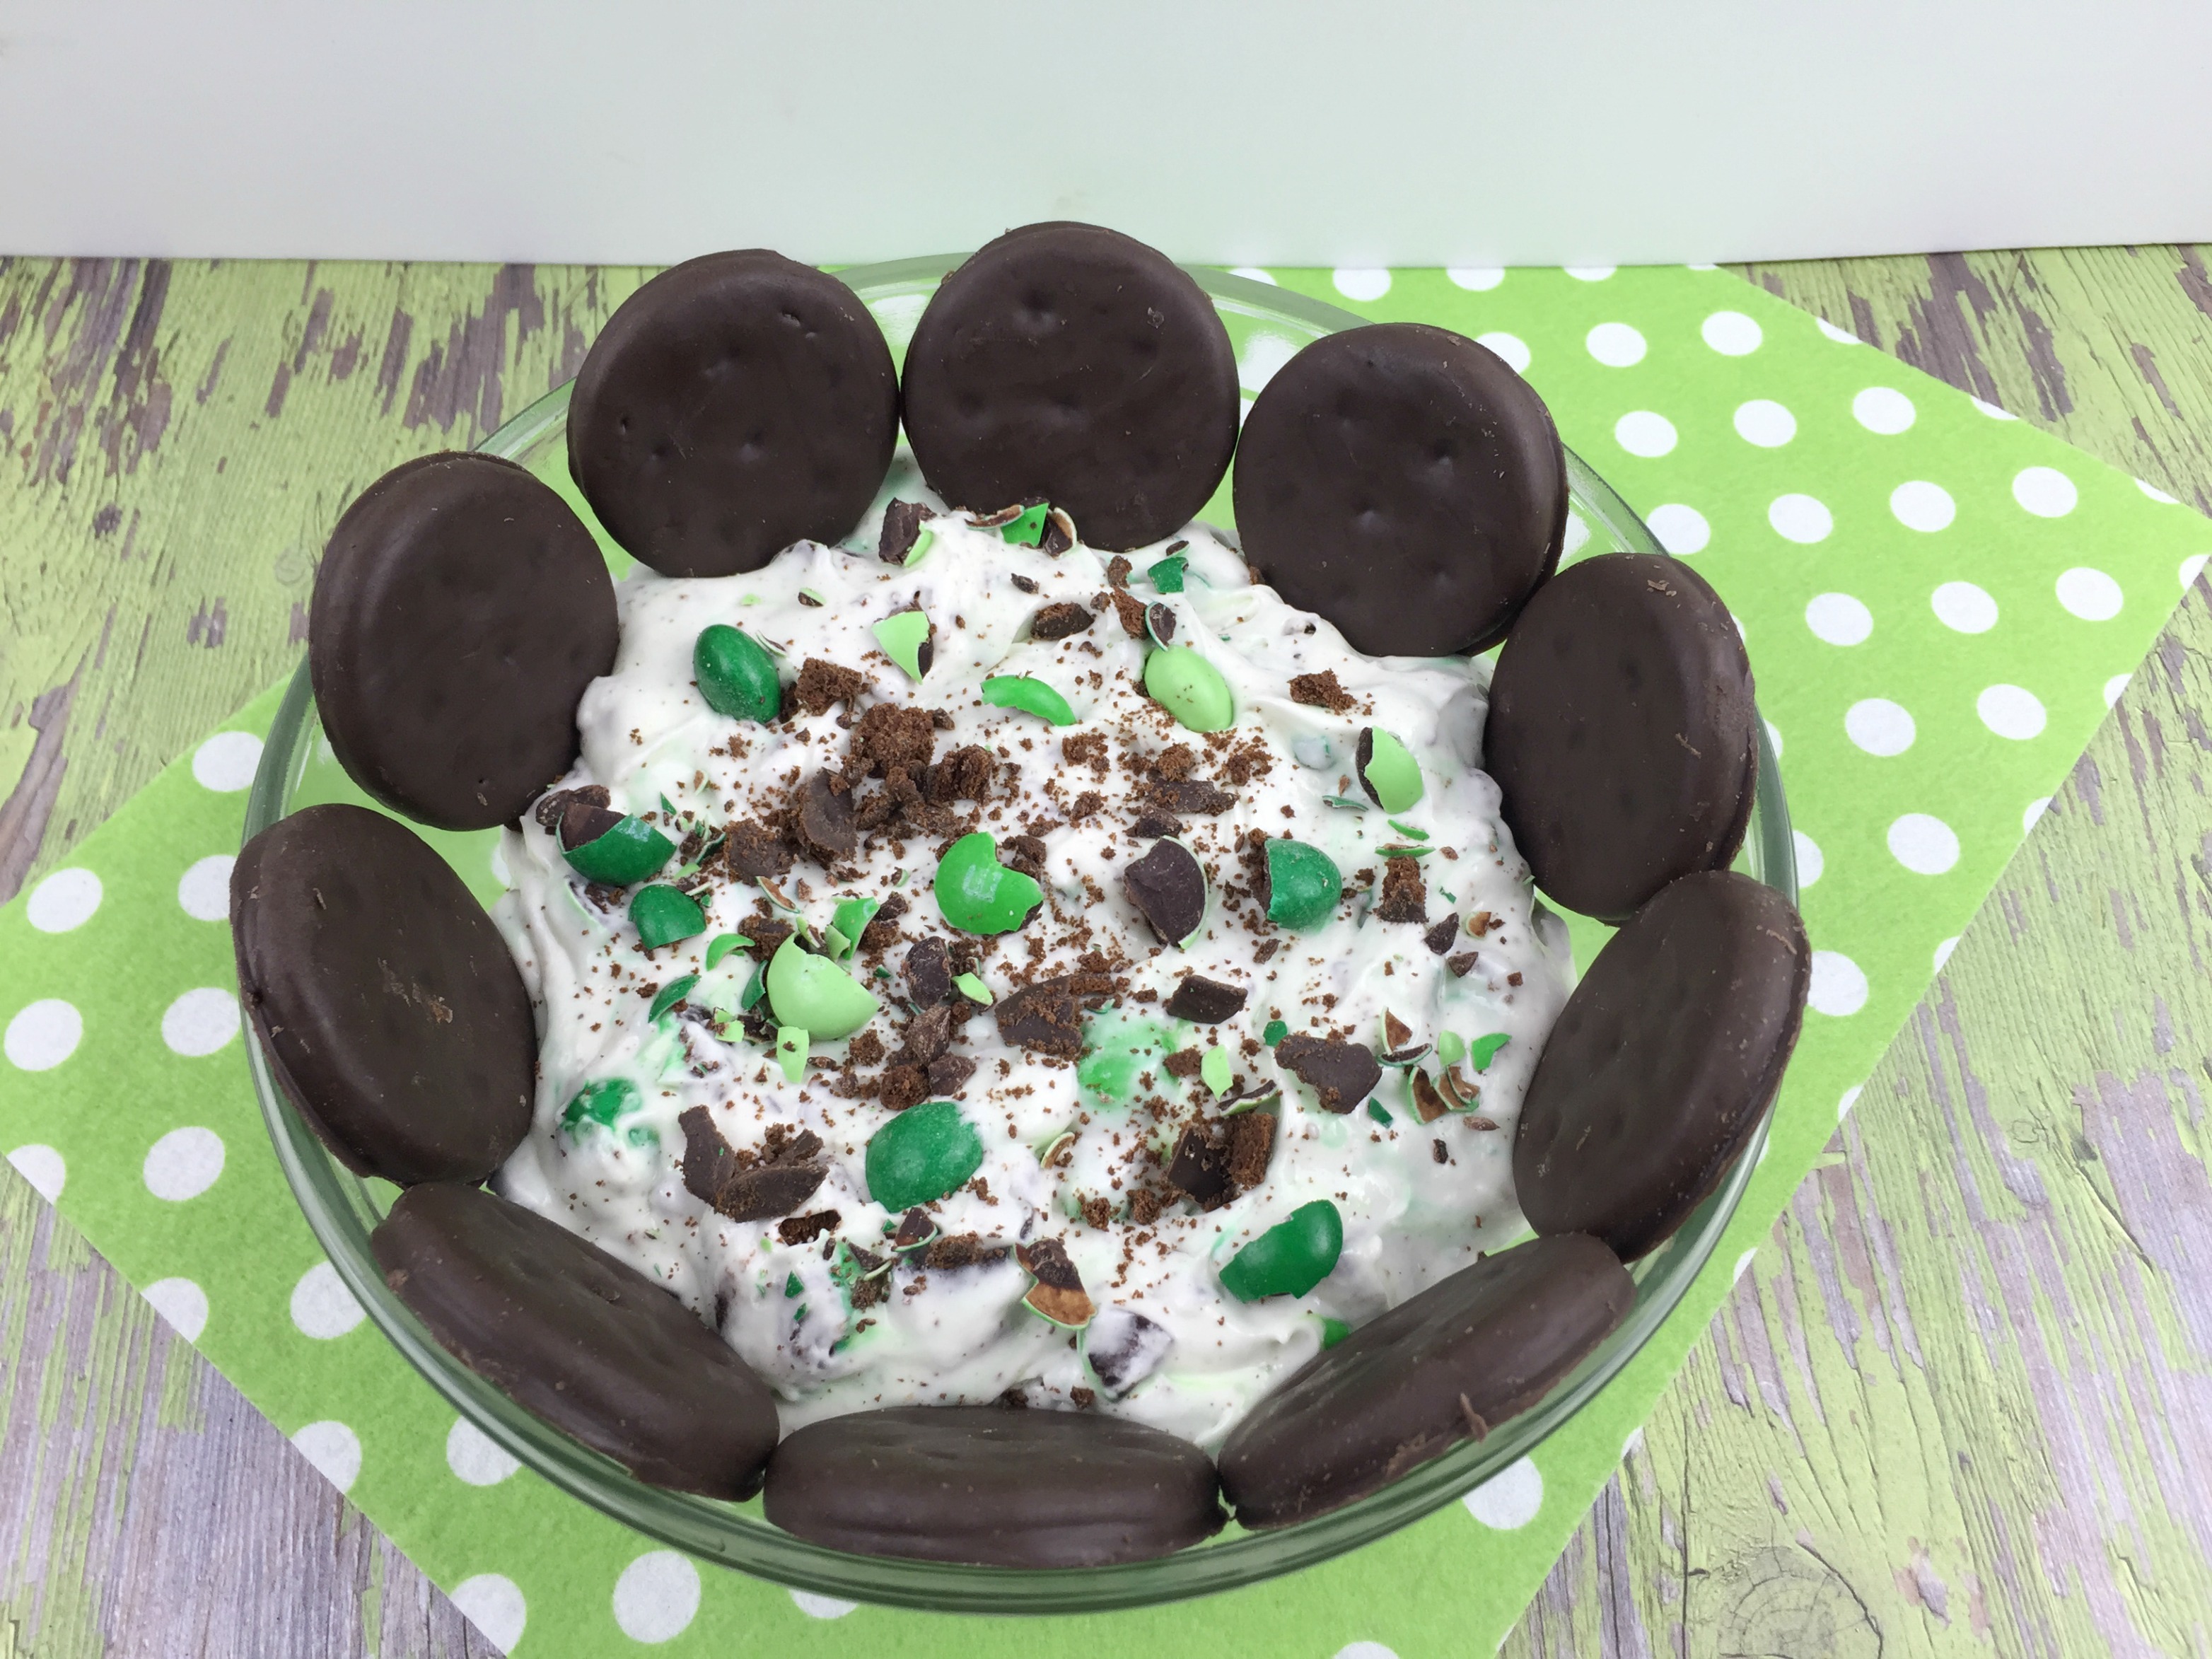 Thin Mint dessert that tastes like the Girl Scout cookies.